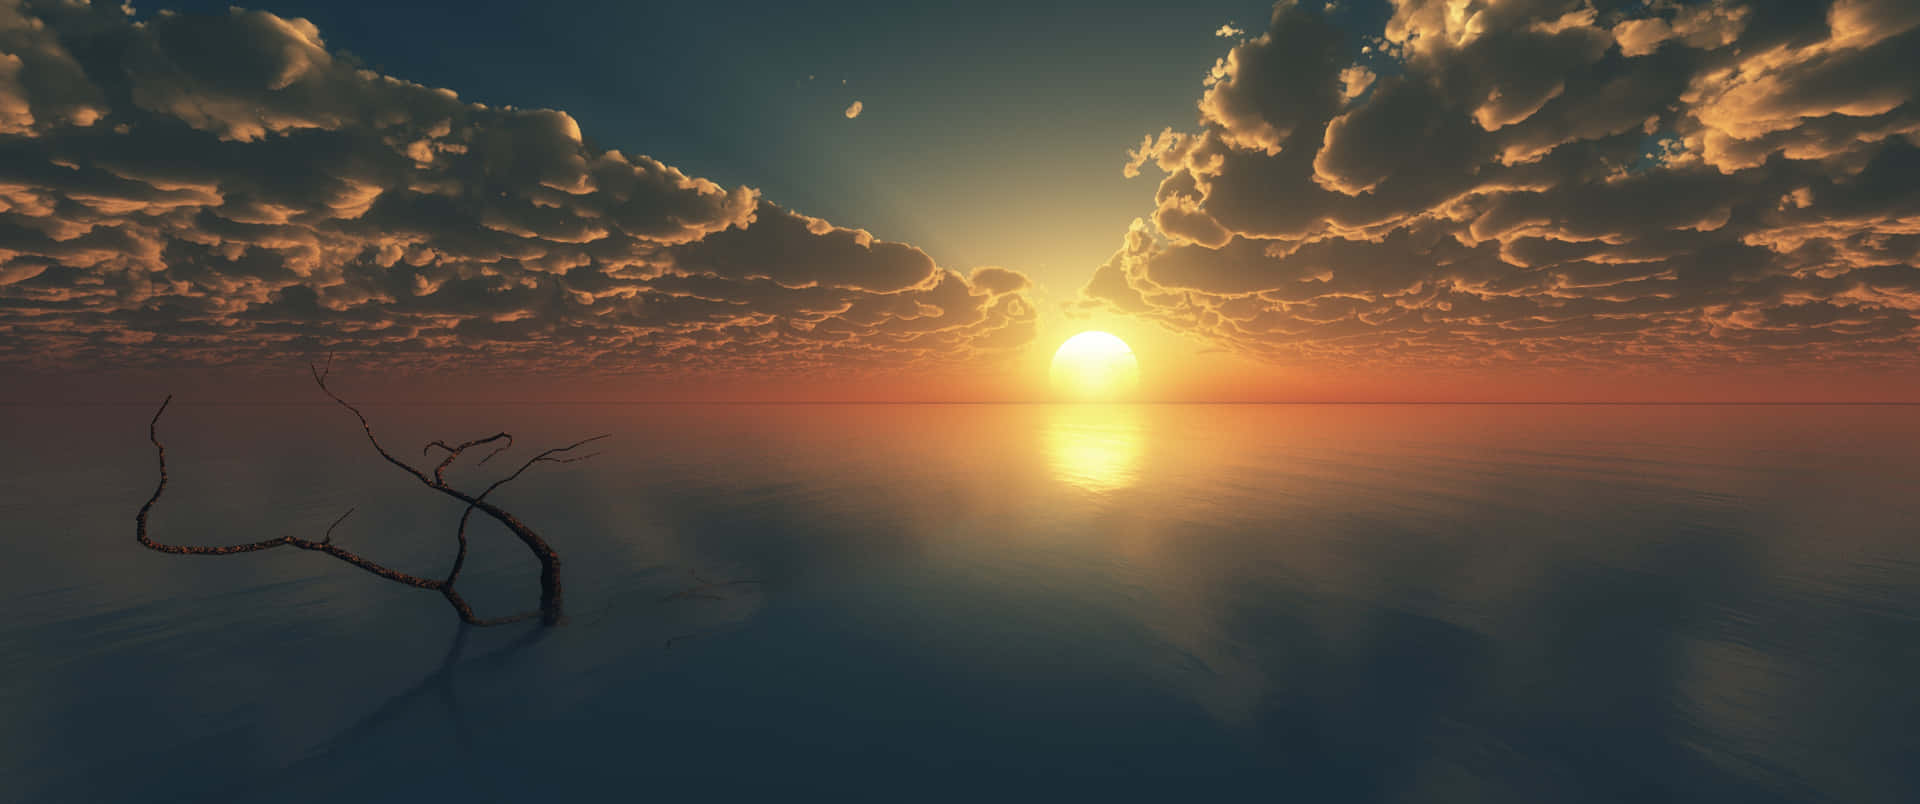 3440x1440p Cloudy Sunset Sky Background